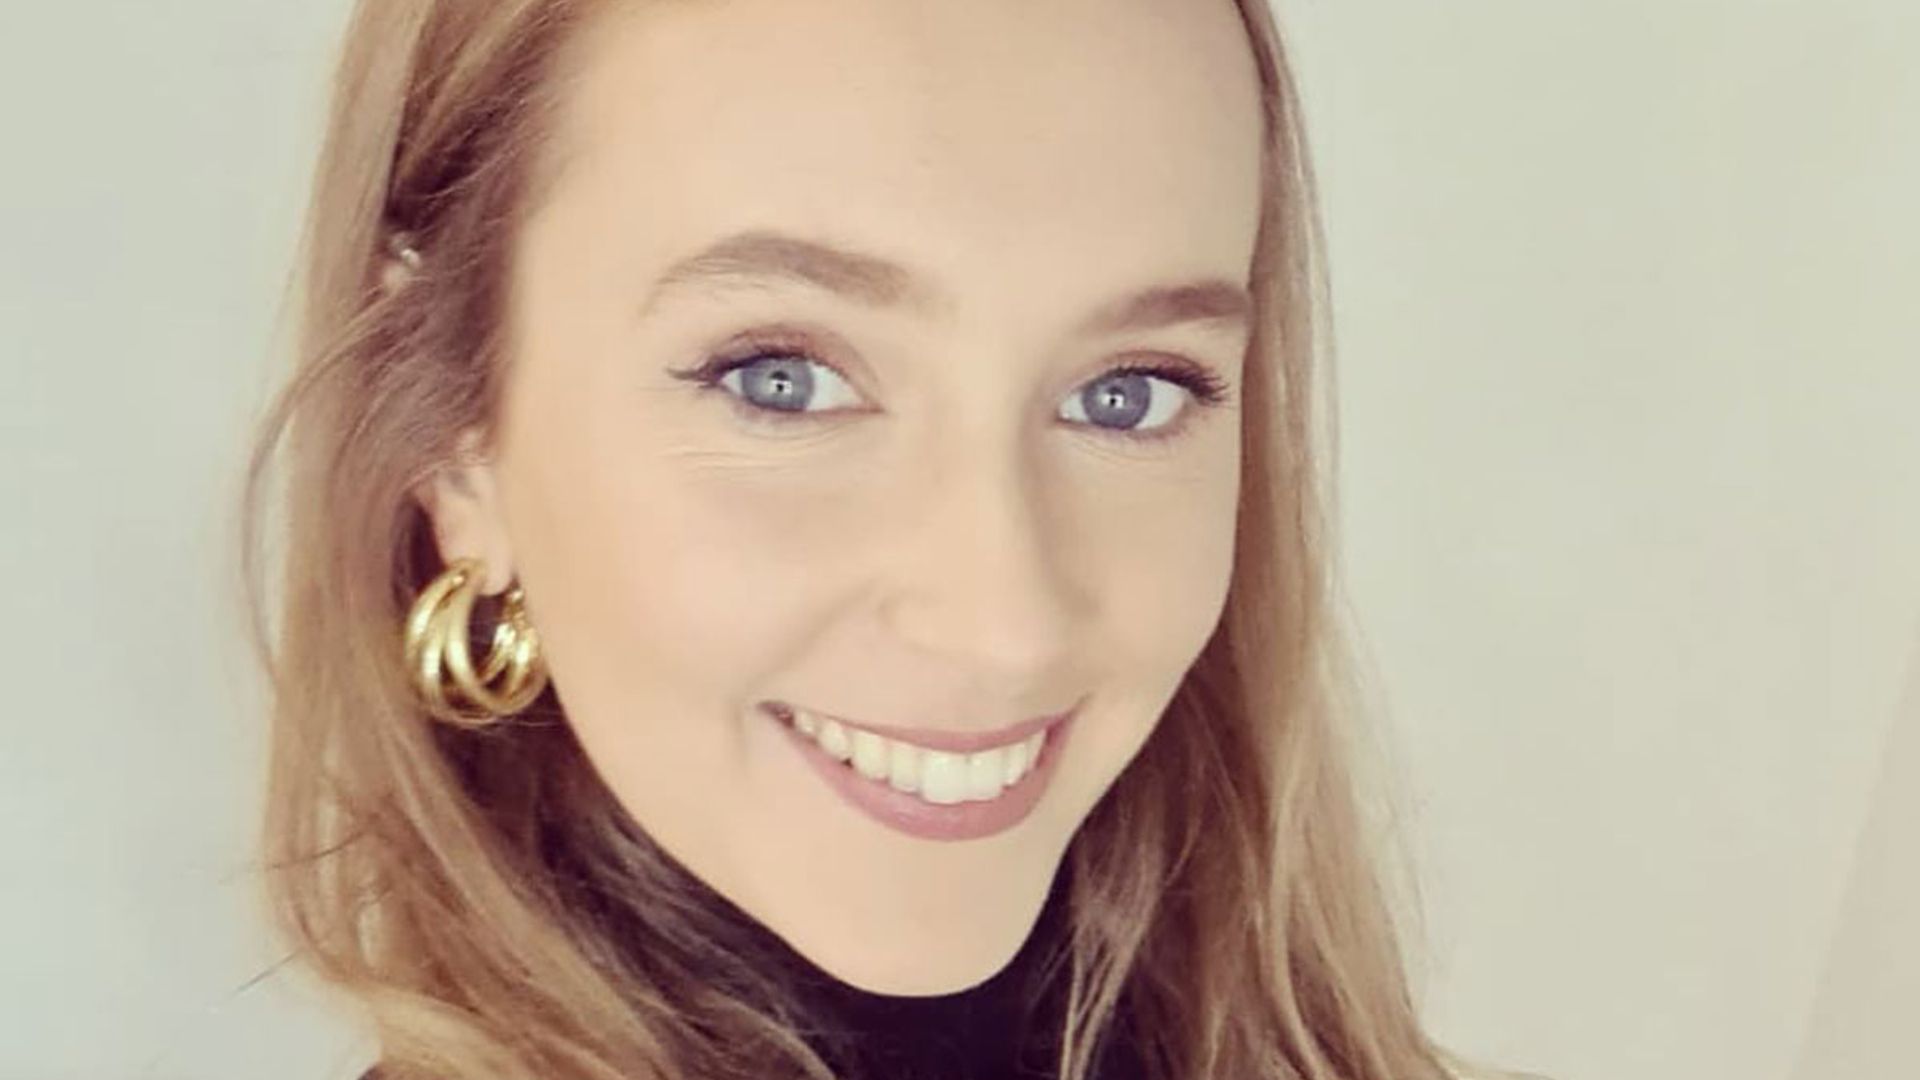 Rose Ayling-Ellis swaps Strictly glamour for low-key look